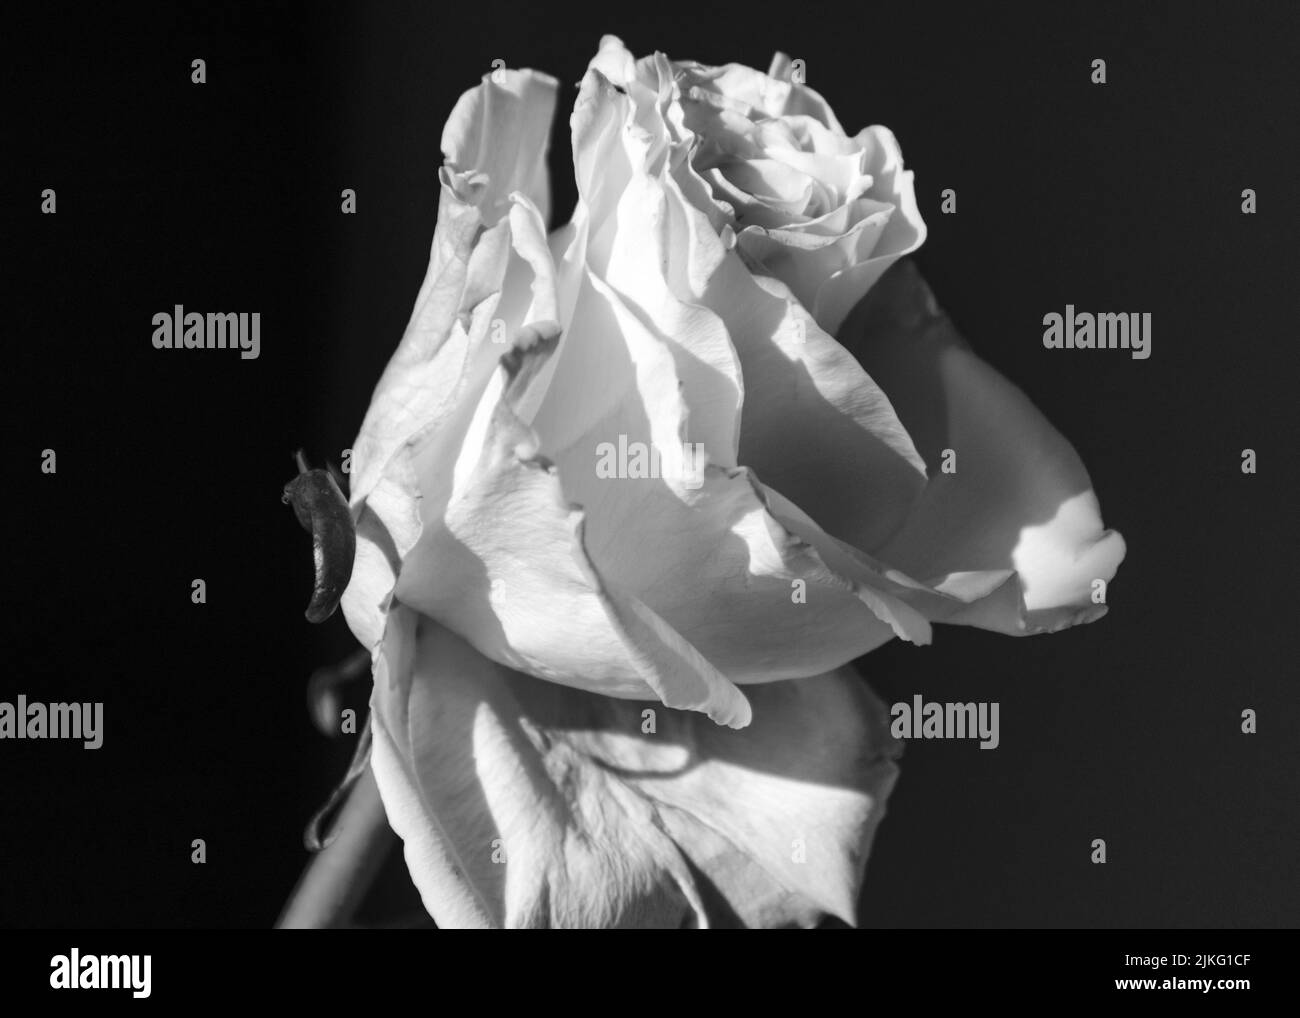 beautiful, simple black and white rose flower, close-up view of the flower on a dark background, black and white photography Stock Photo